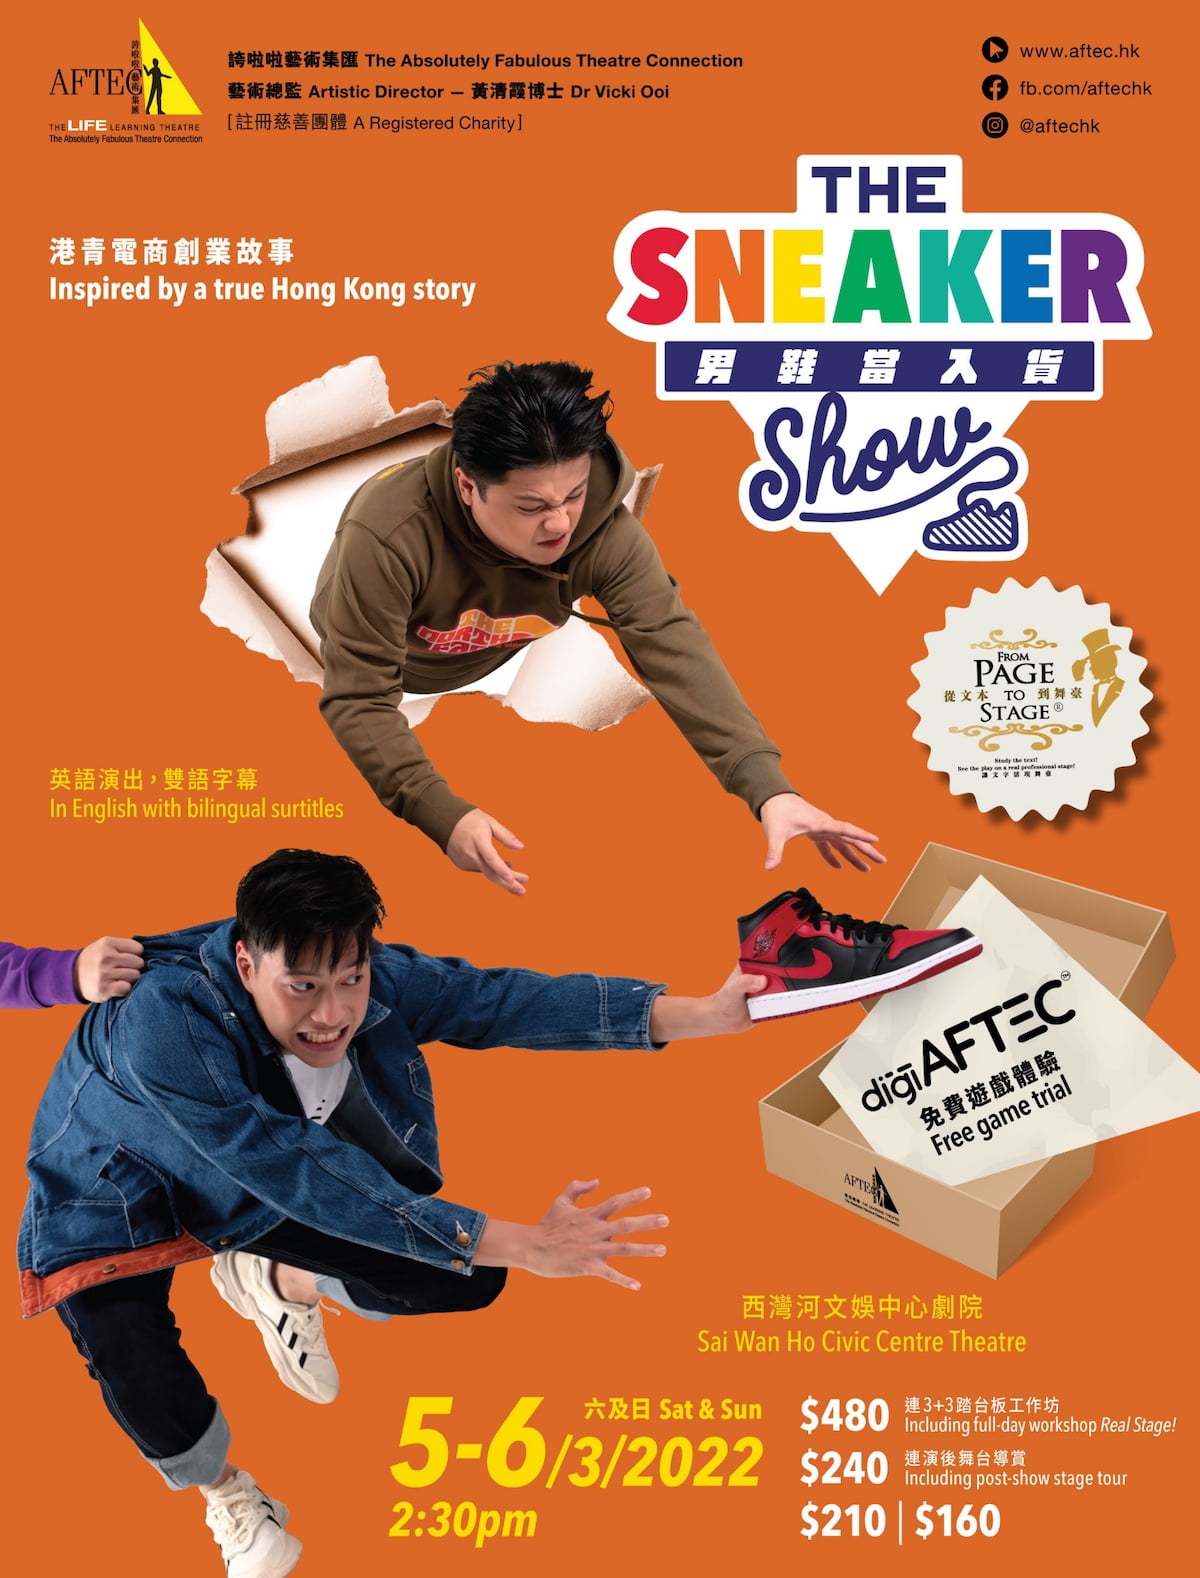 The Sneaker Show 2022